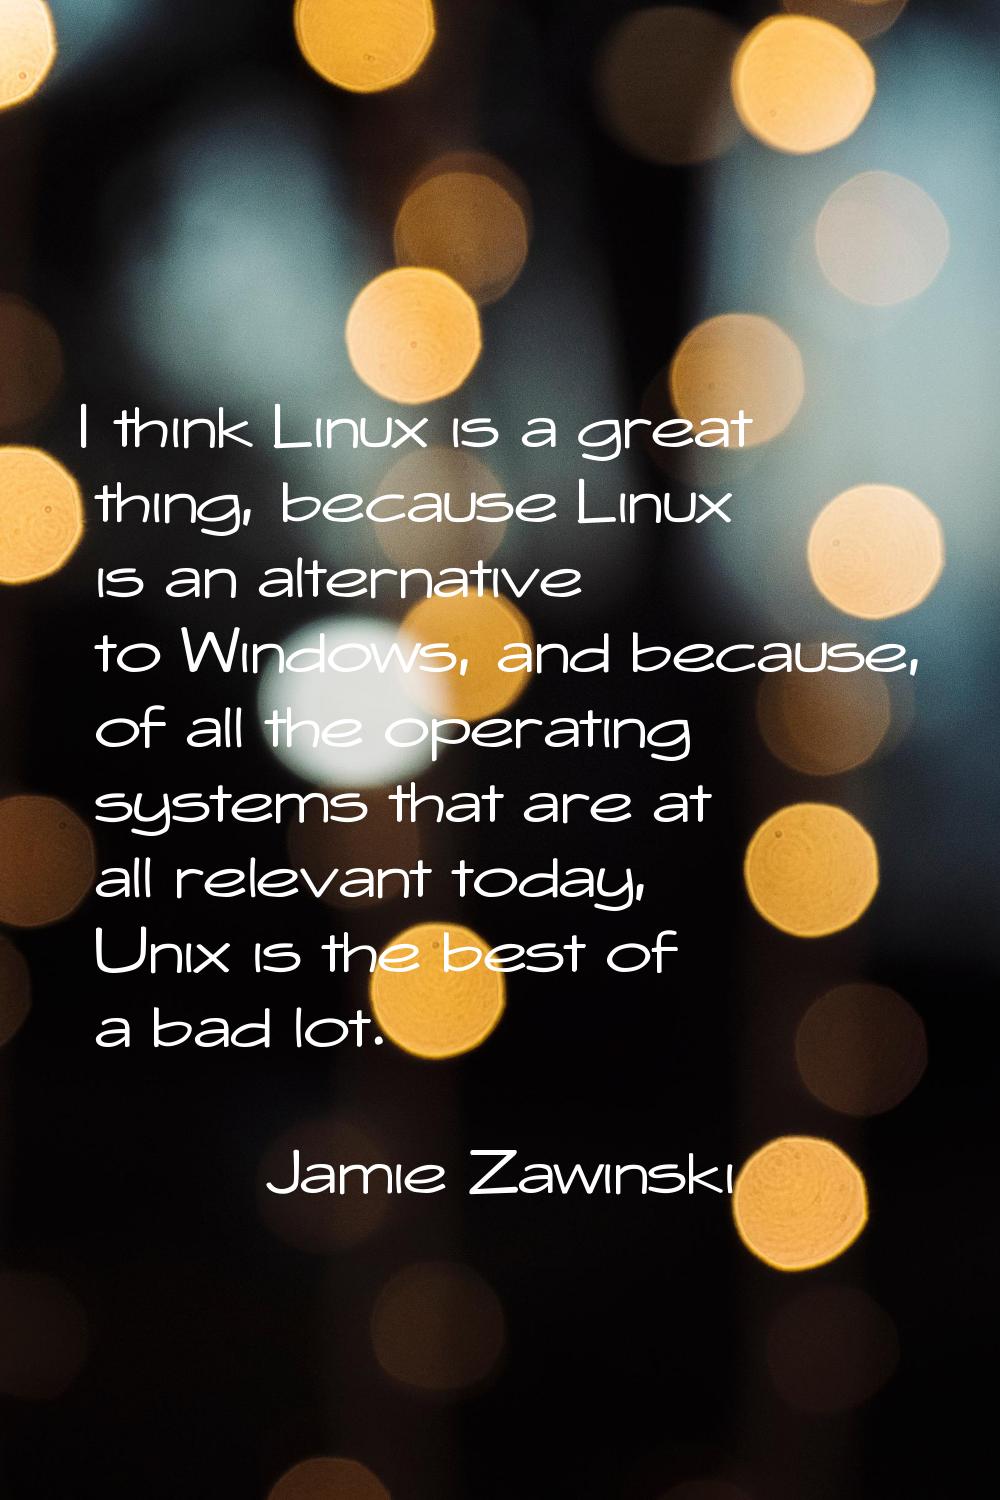 I think Linux is a great thing, because Linux is an alternative to Windows, and because, of all the